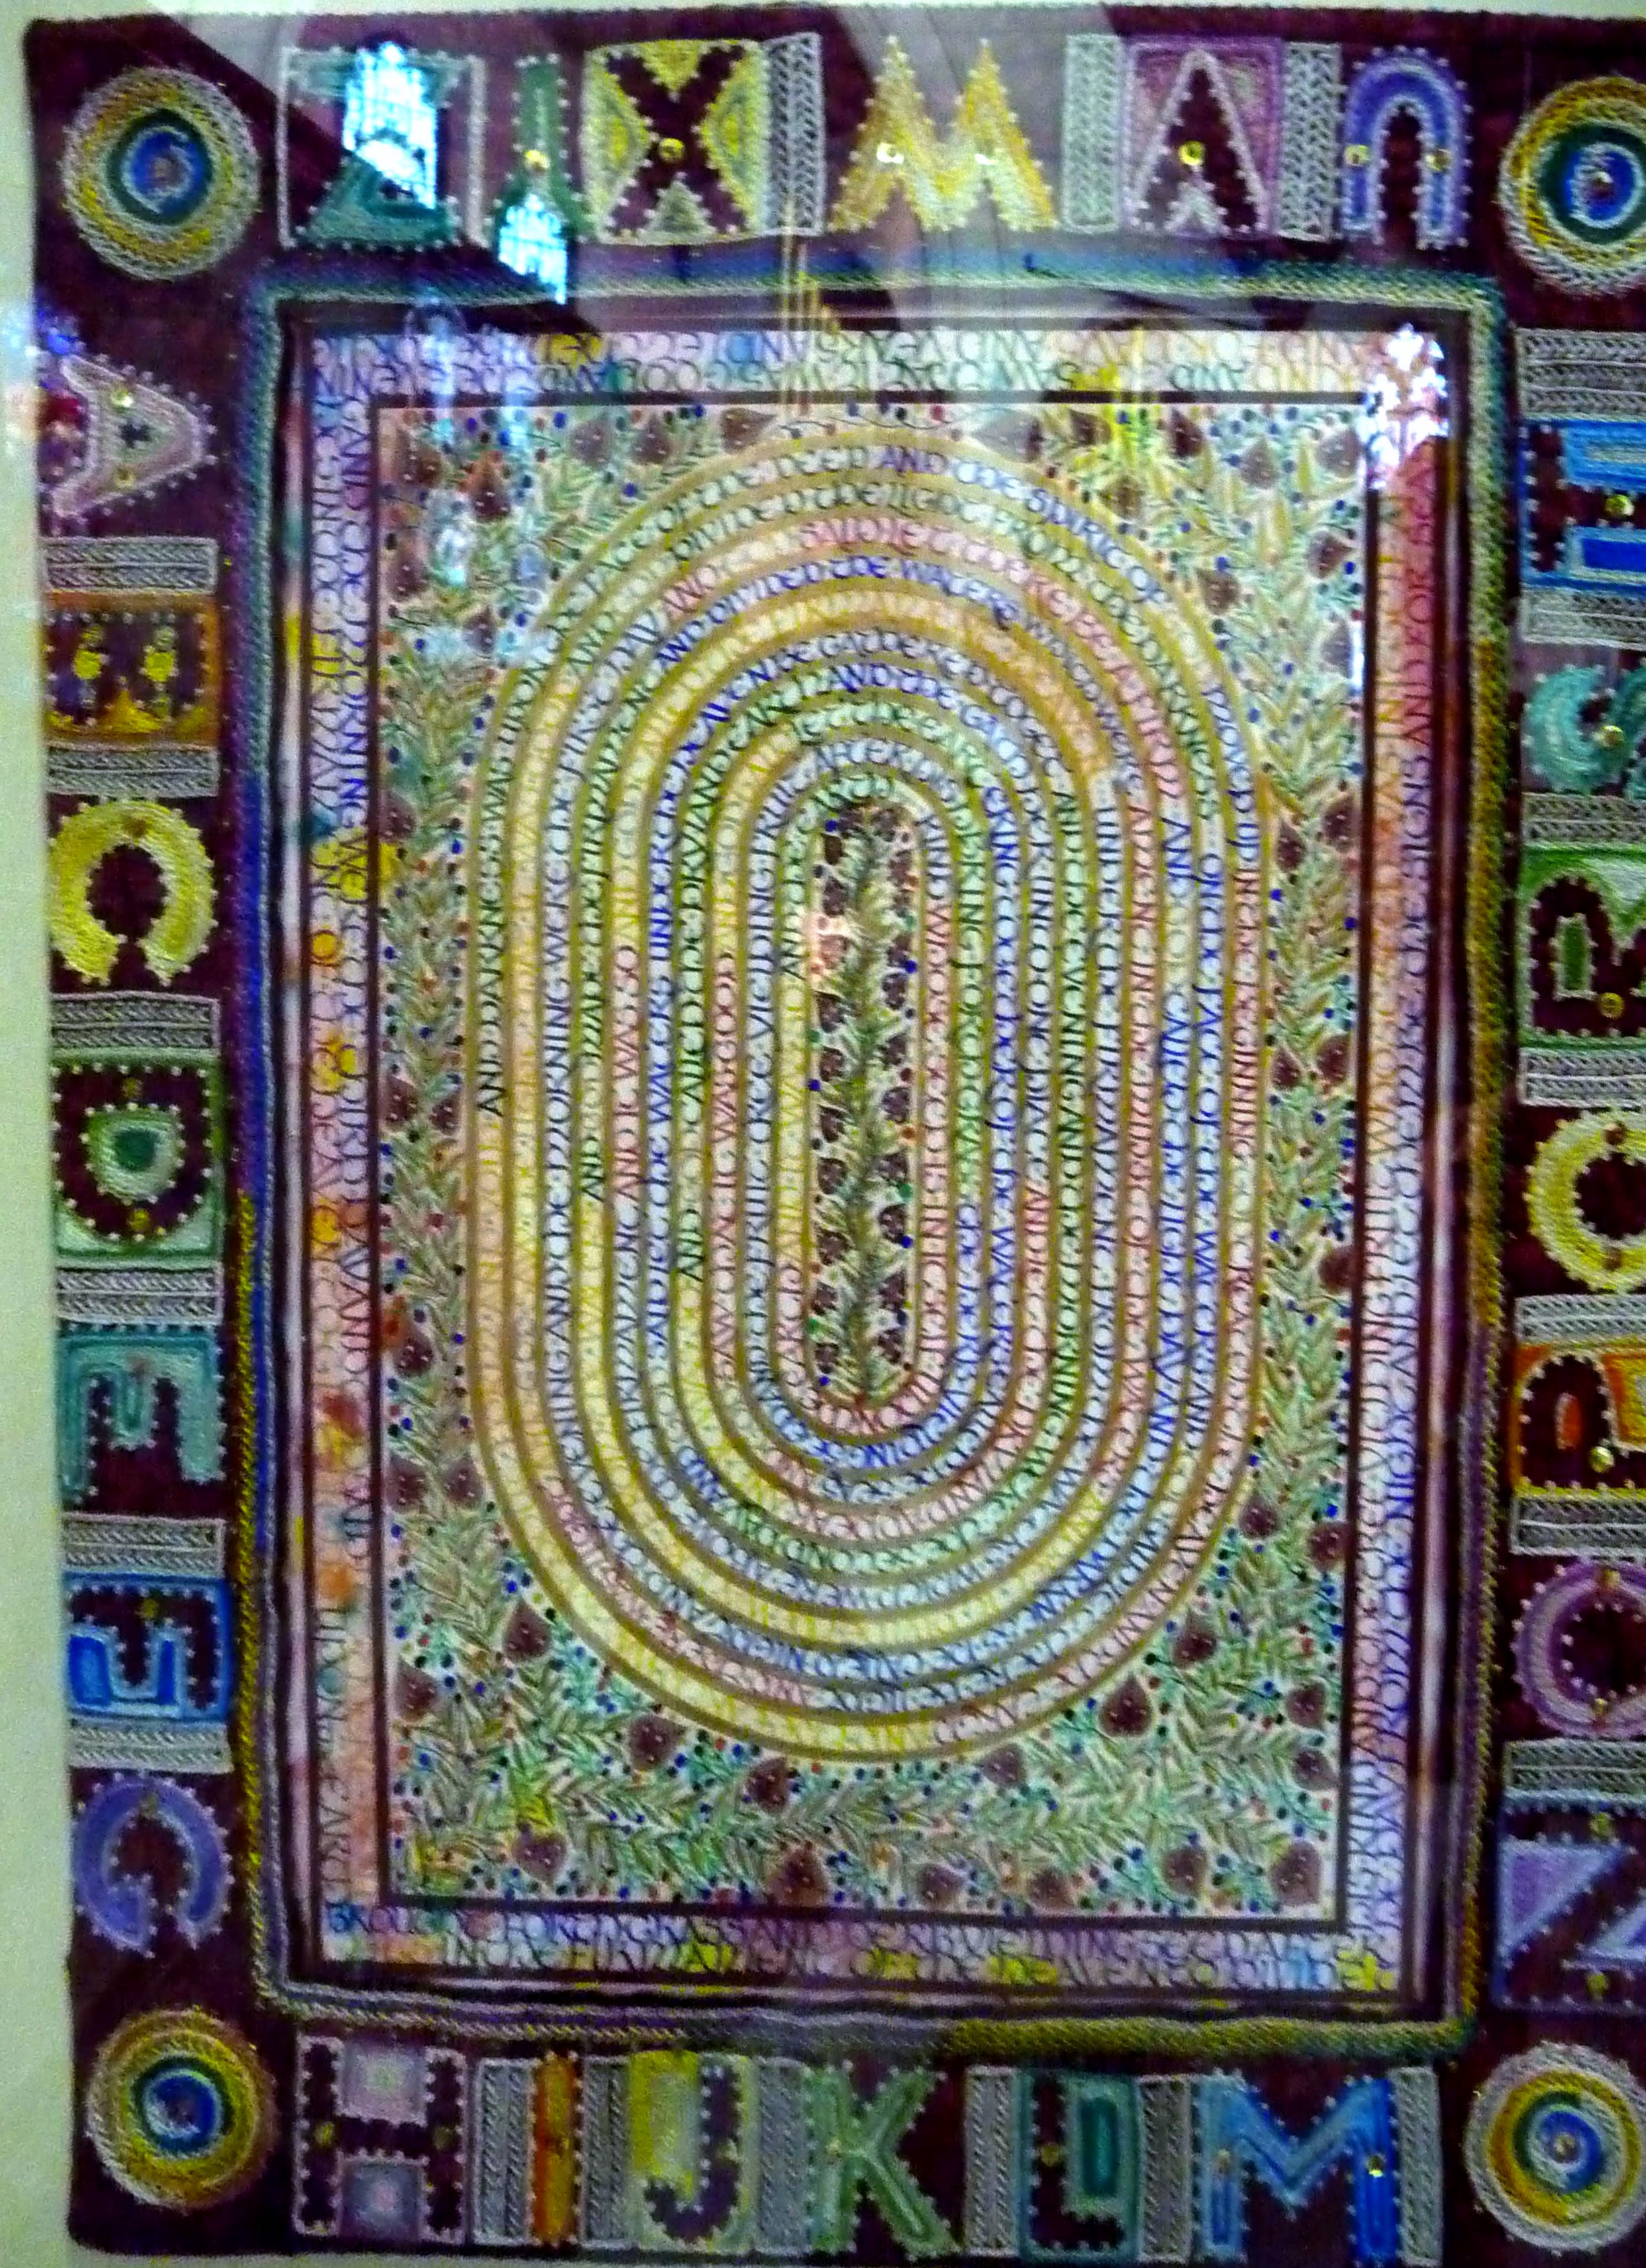 CREATION: A CELEBRATION by Sue Symonds, CARPET PAGE: LANGUAGE , painting with embroidered frame